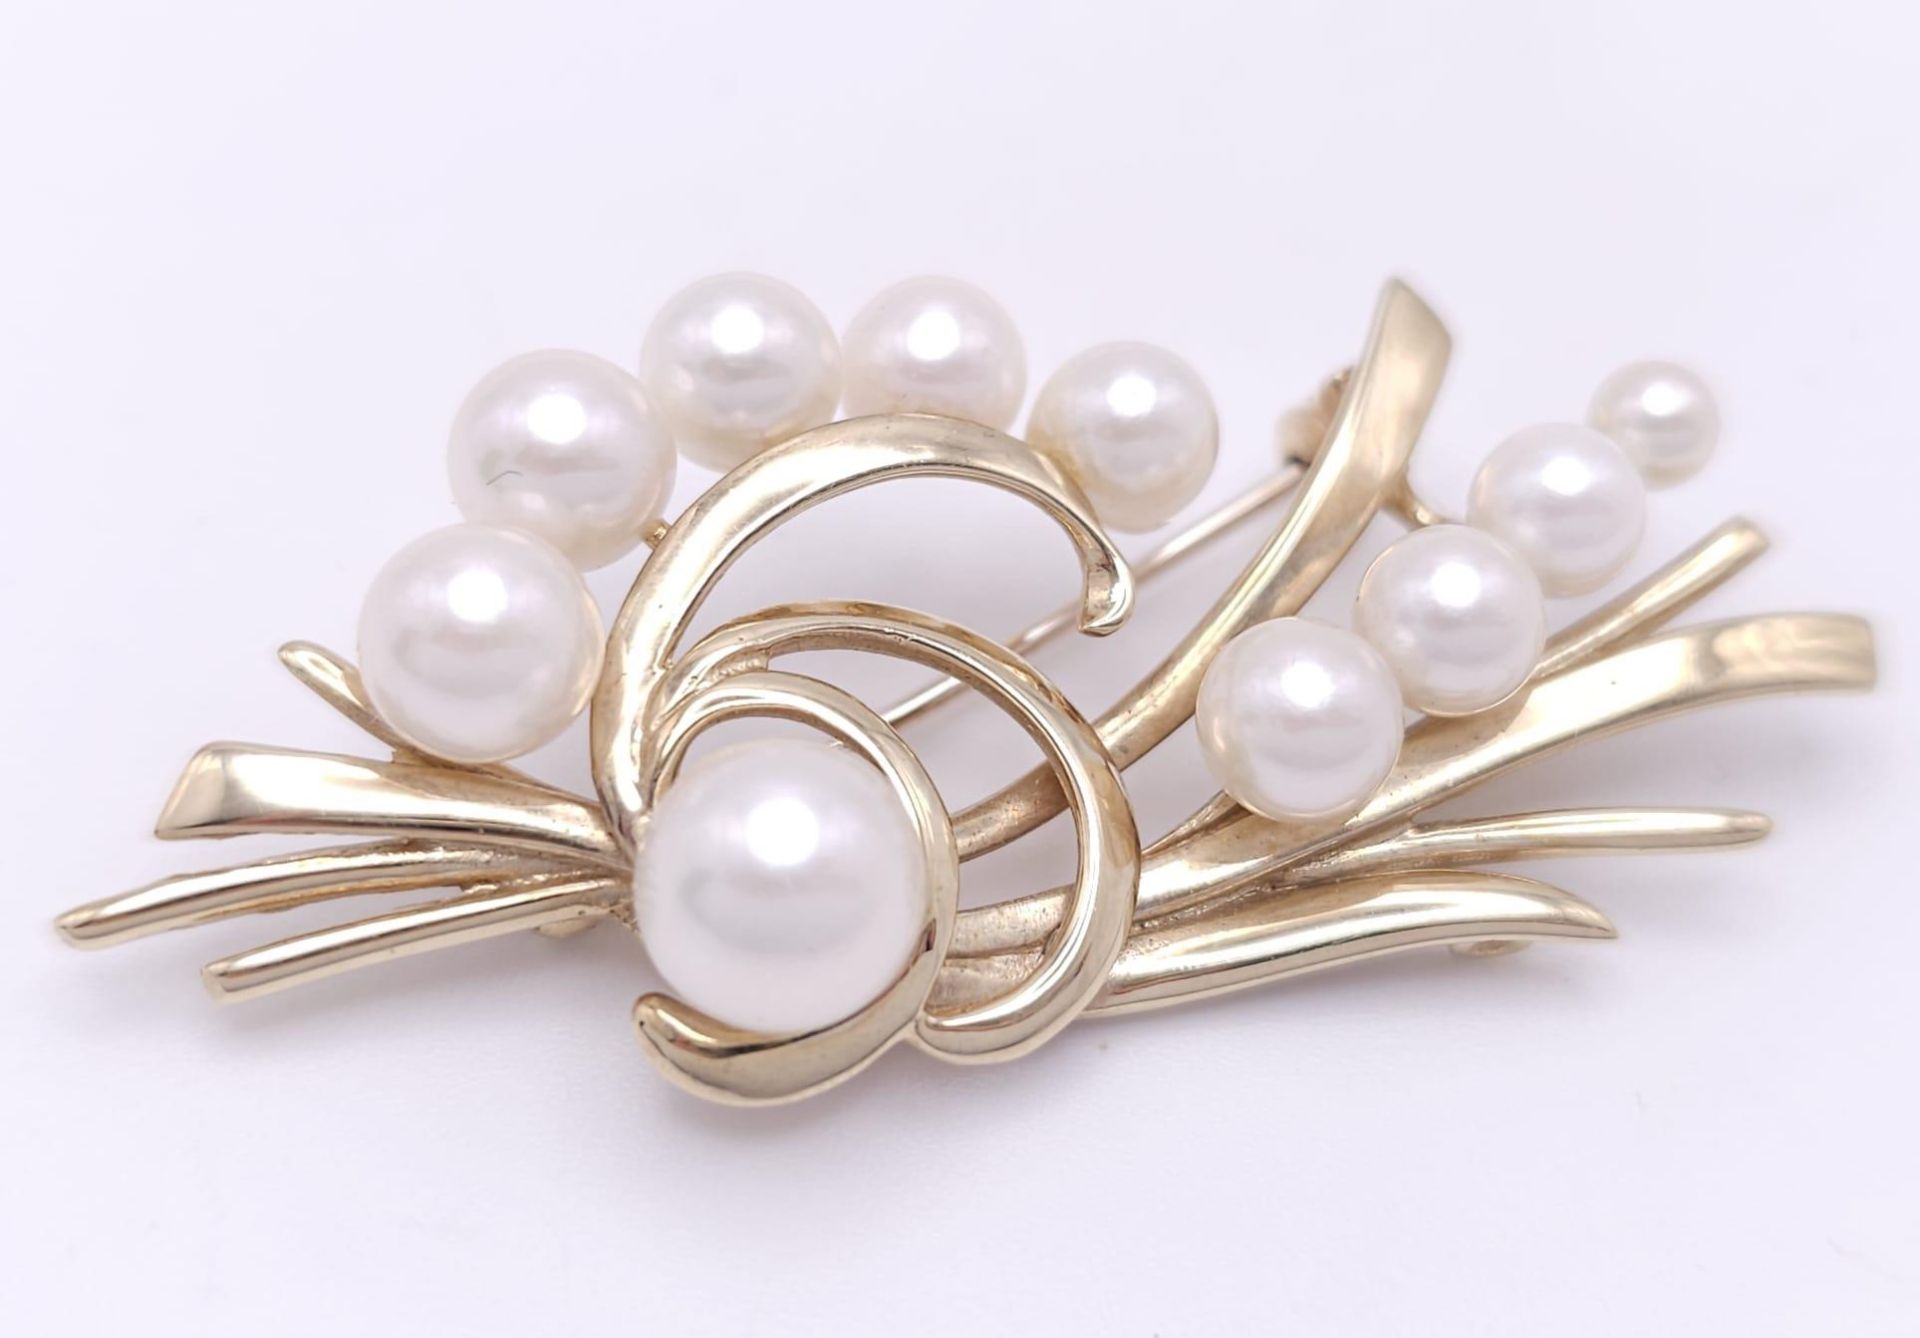 A 9k Yellow Gold and Pearl Decorative Floral Brooch. 5cm. 8g weight - Image 11 of 23